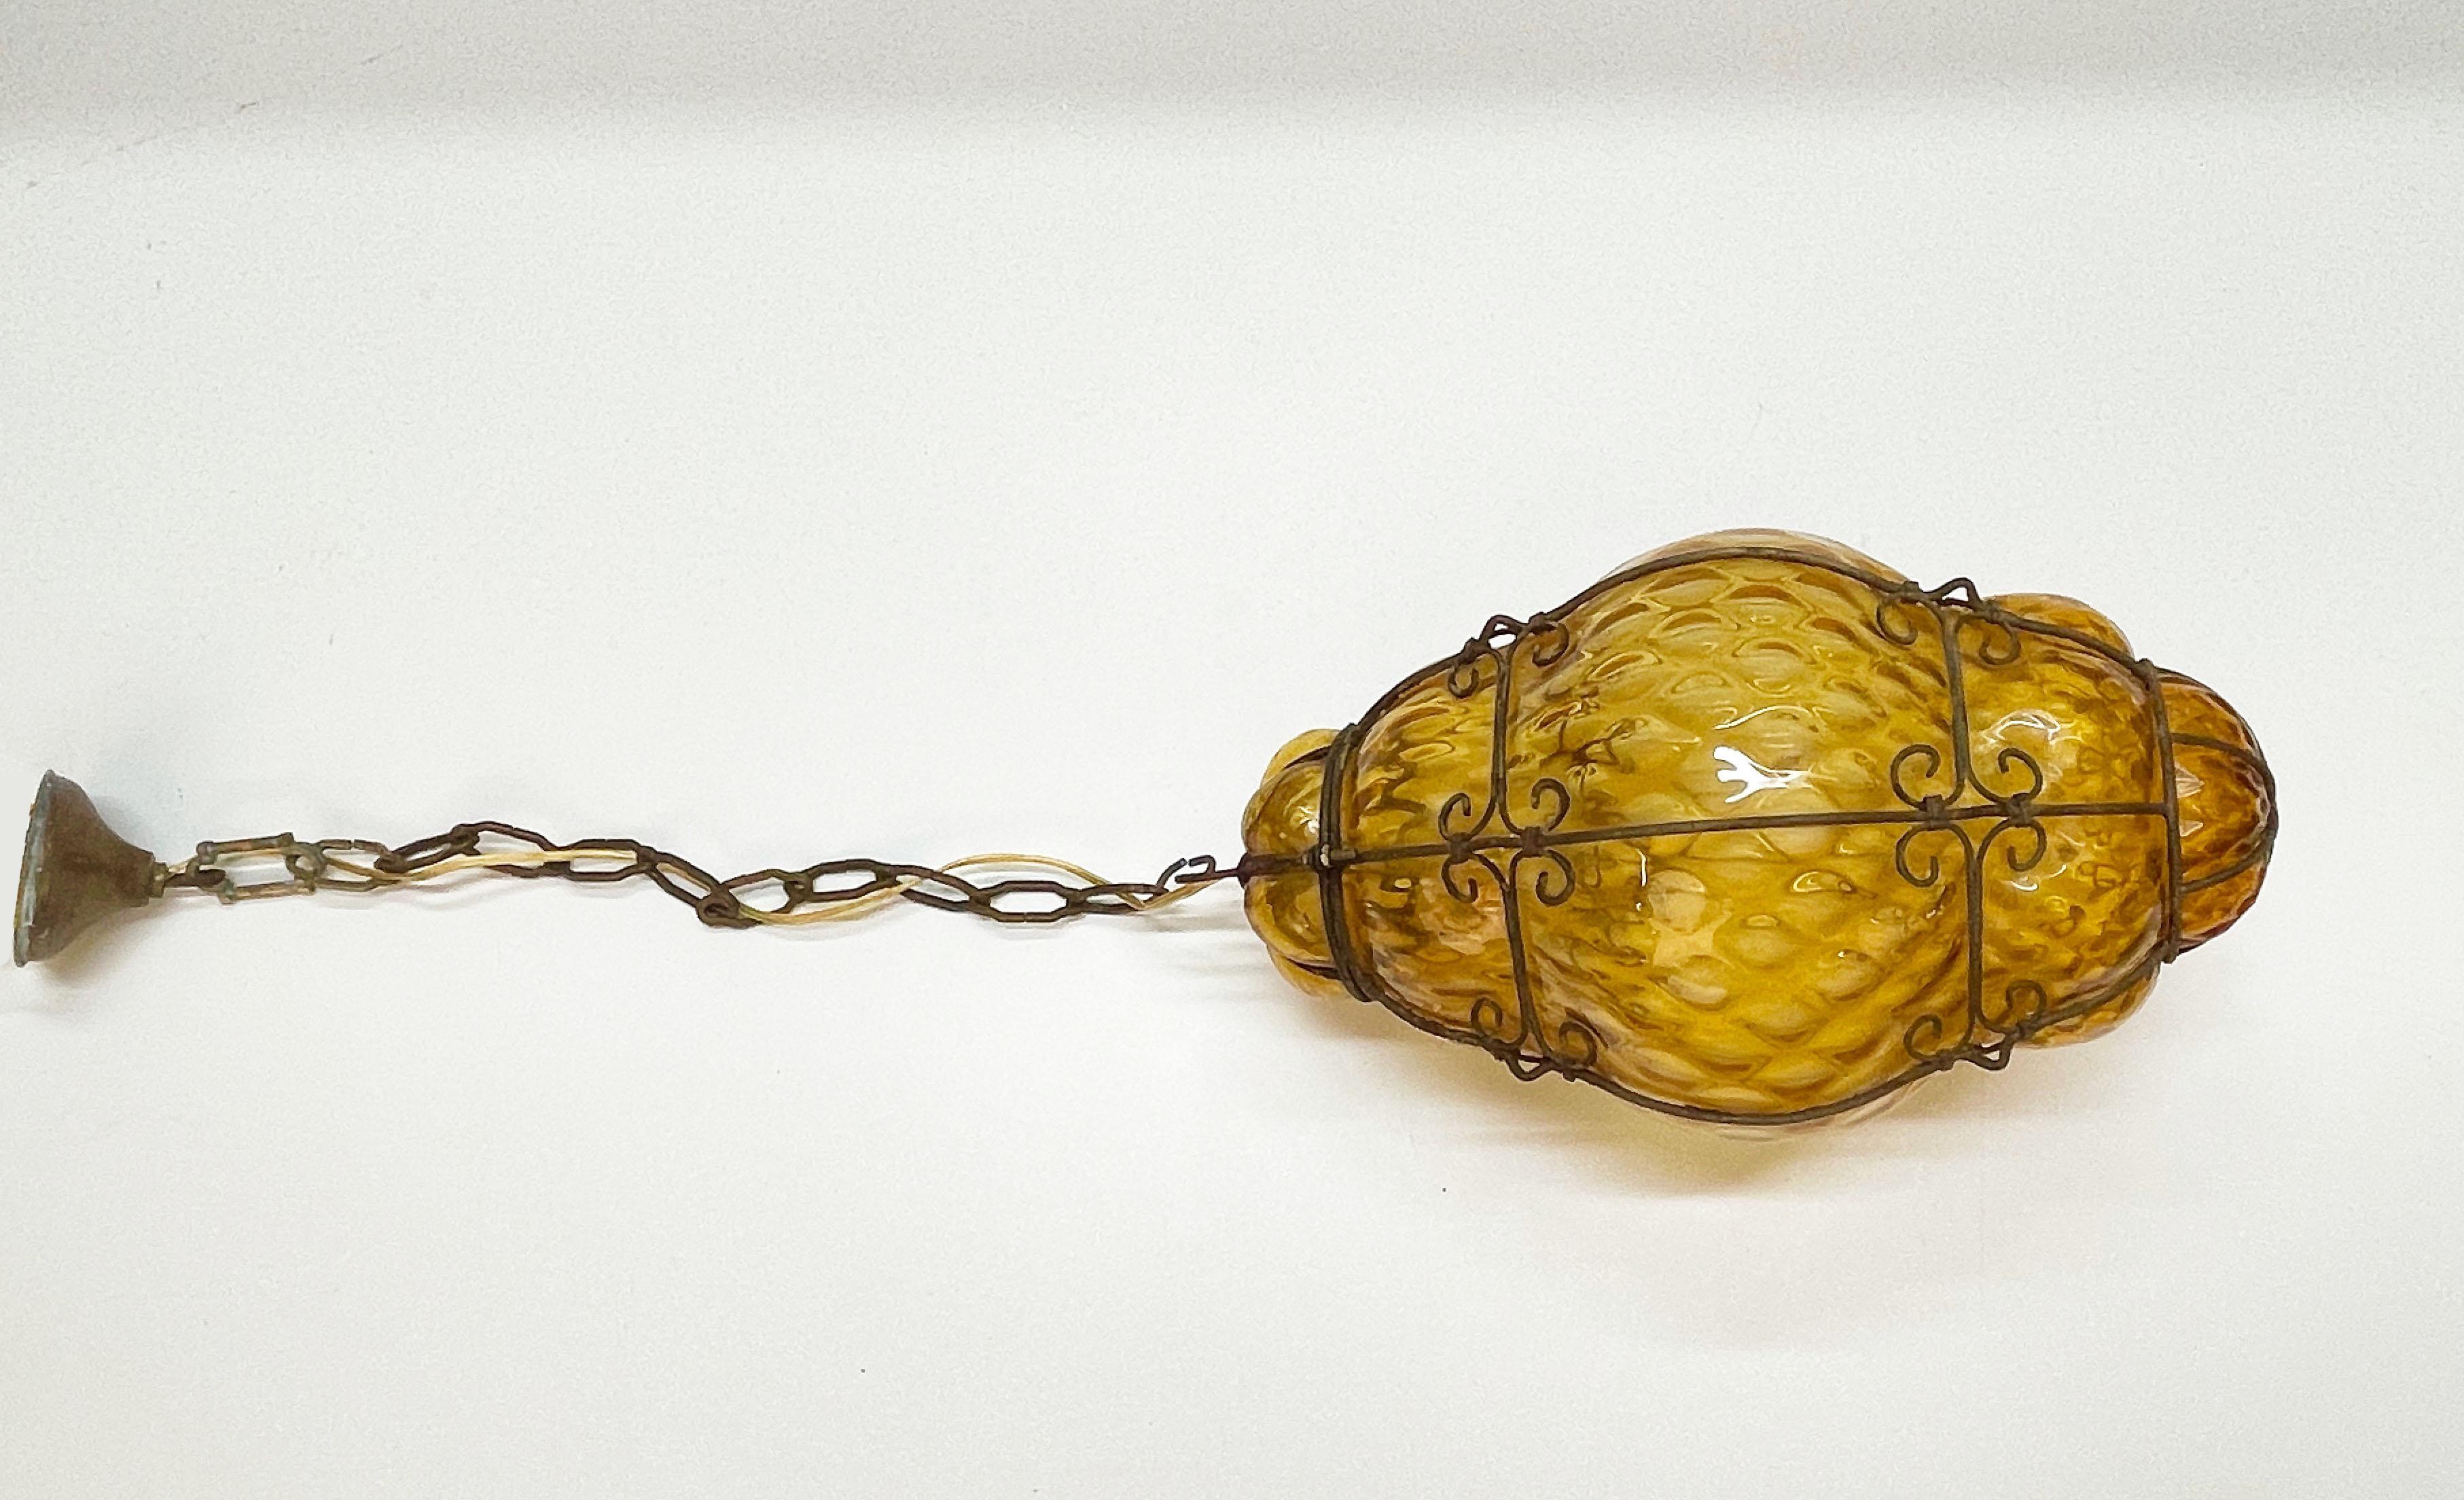 Beautiful Murano glass bubble chandelier with amber glass cage. The glass is hand-blown with an amber shade and was created by Giorgio Seguso in the 1940s in Italy.

This Murano glass bubble cage pendant with an oriental style and 